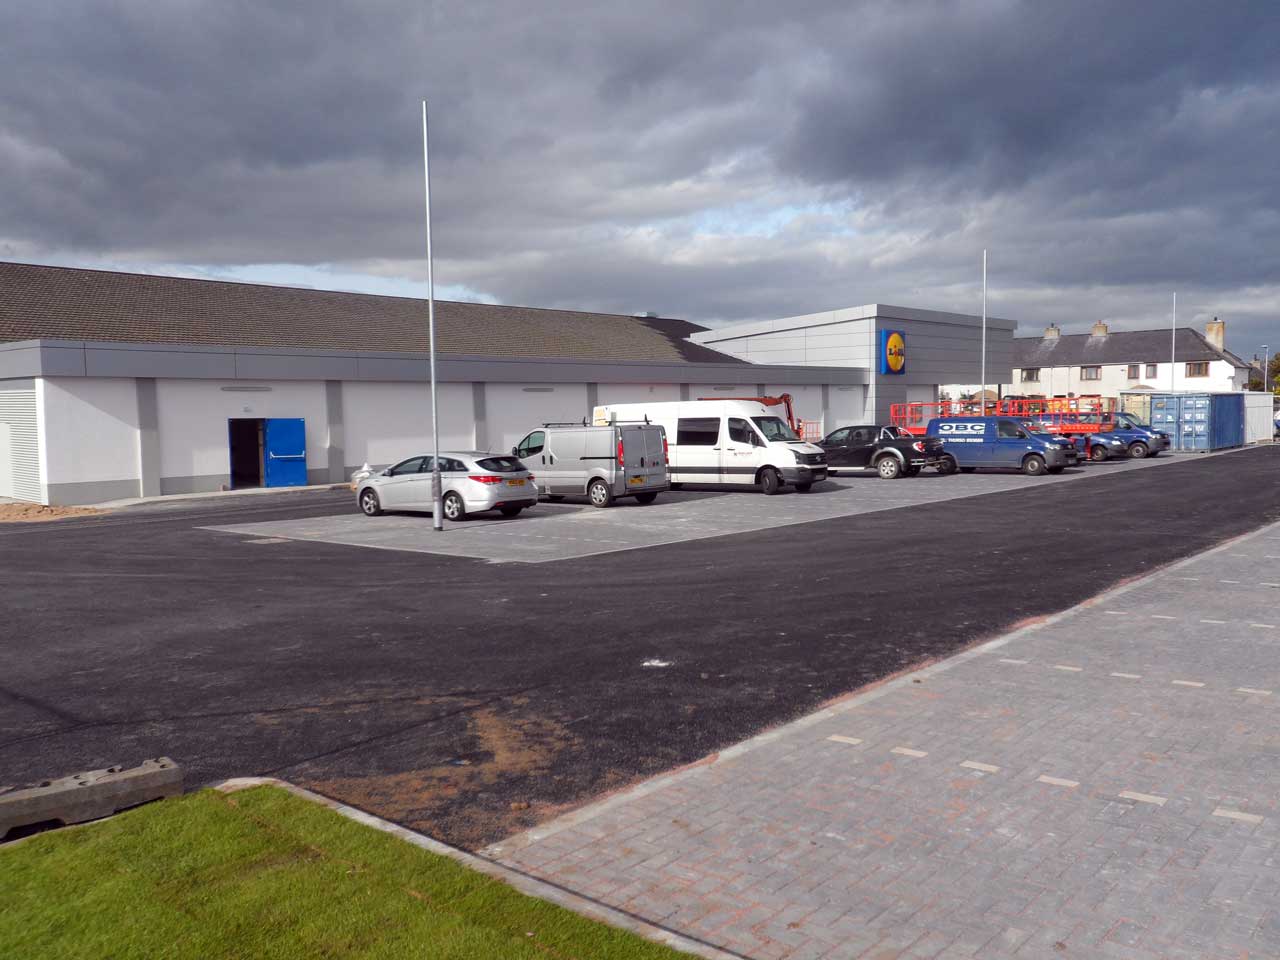 Photo: Lidl Extension Nears Completion, Wick - 27 September 2014